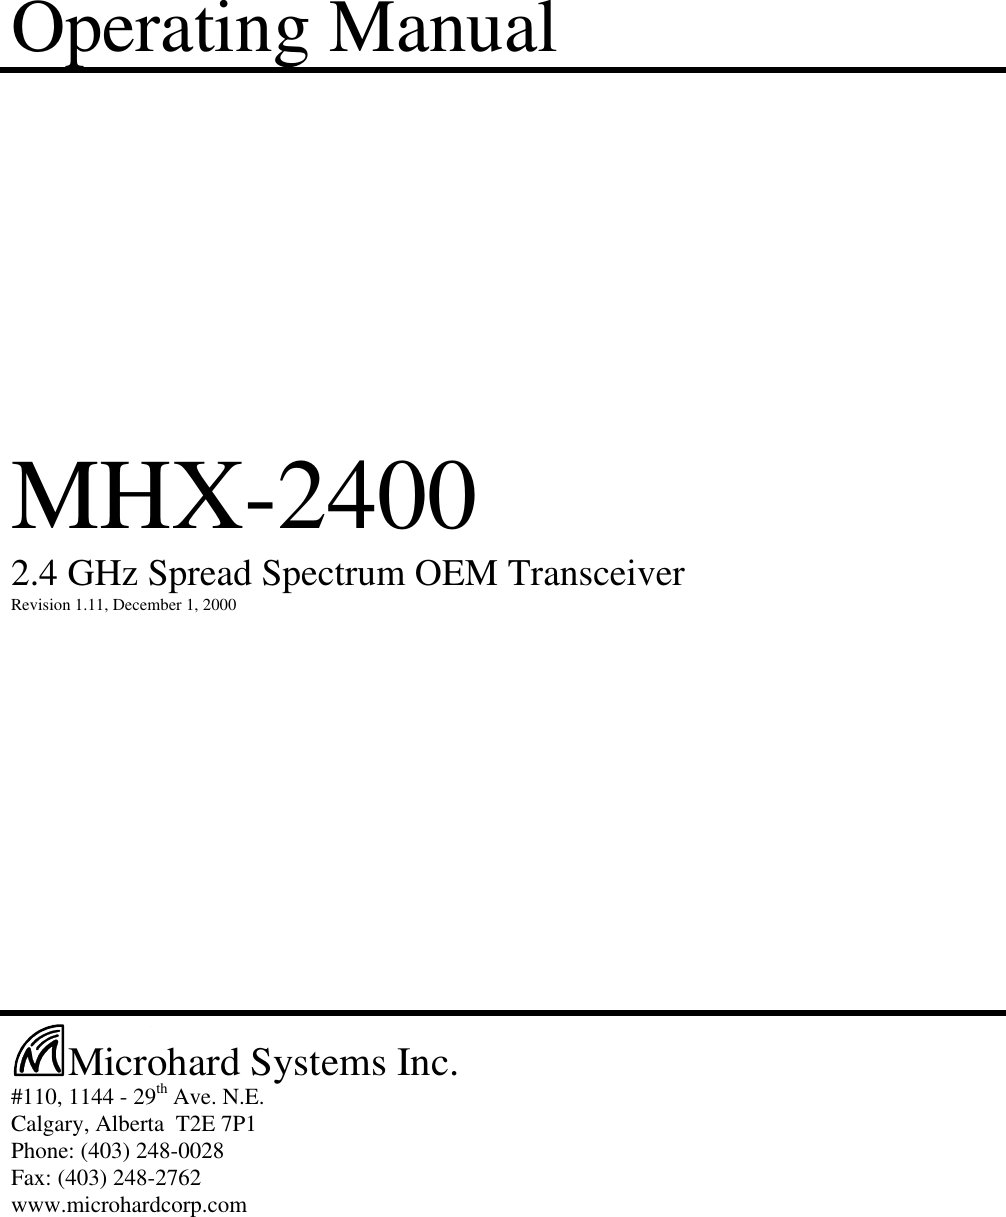 Operating ManualMHX-24002.4 GHz Spread Spectrum OEM TransceiverRevision 1.11, December 1, 2000Microhard Systems Inc.#110, 1144 - 29th Ave. N.E.Calgary, Alberta  T2E 7P1Phone: (403) 248-0028Fax: (403) 248-2762www.microhardcorp.com